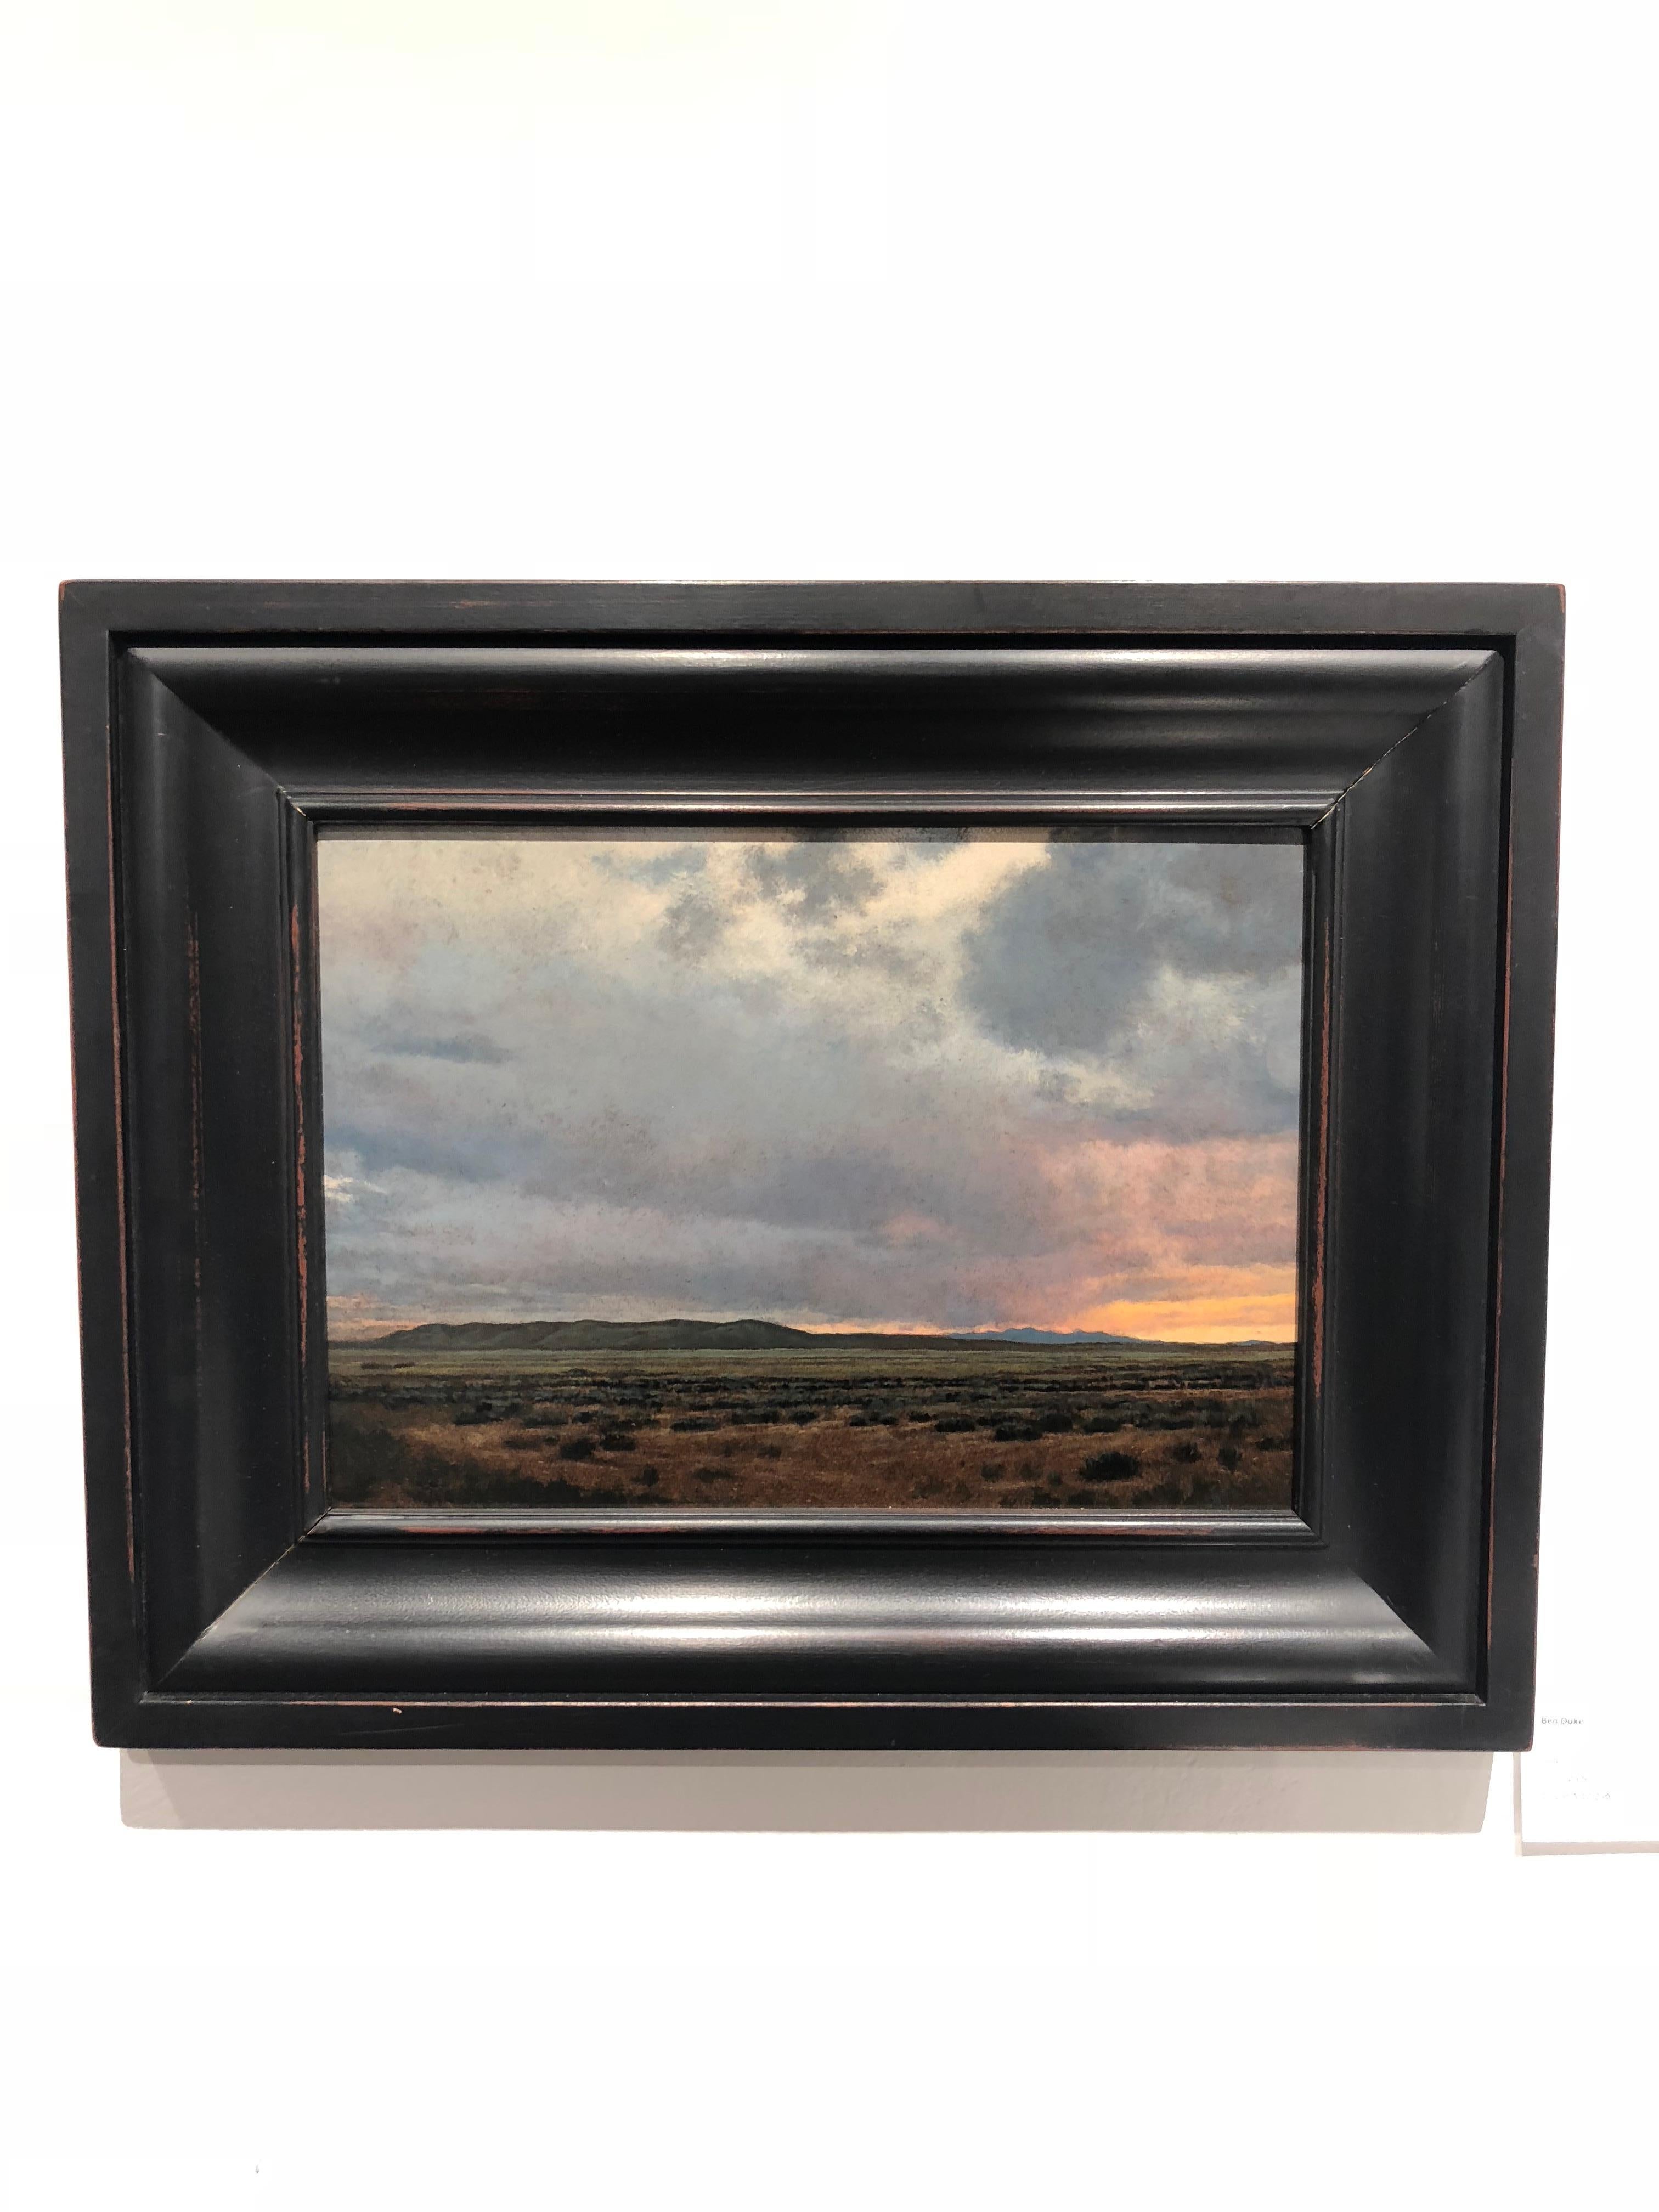 Sunset South of Galisteo, NM - Small Scale Landscape Painting, Oil on Panel 2